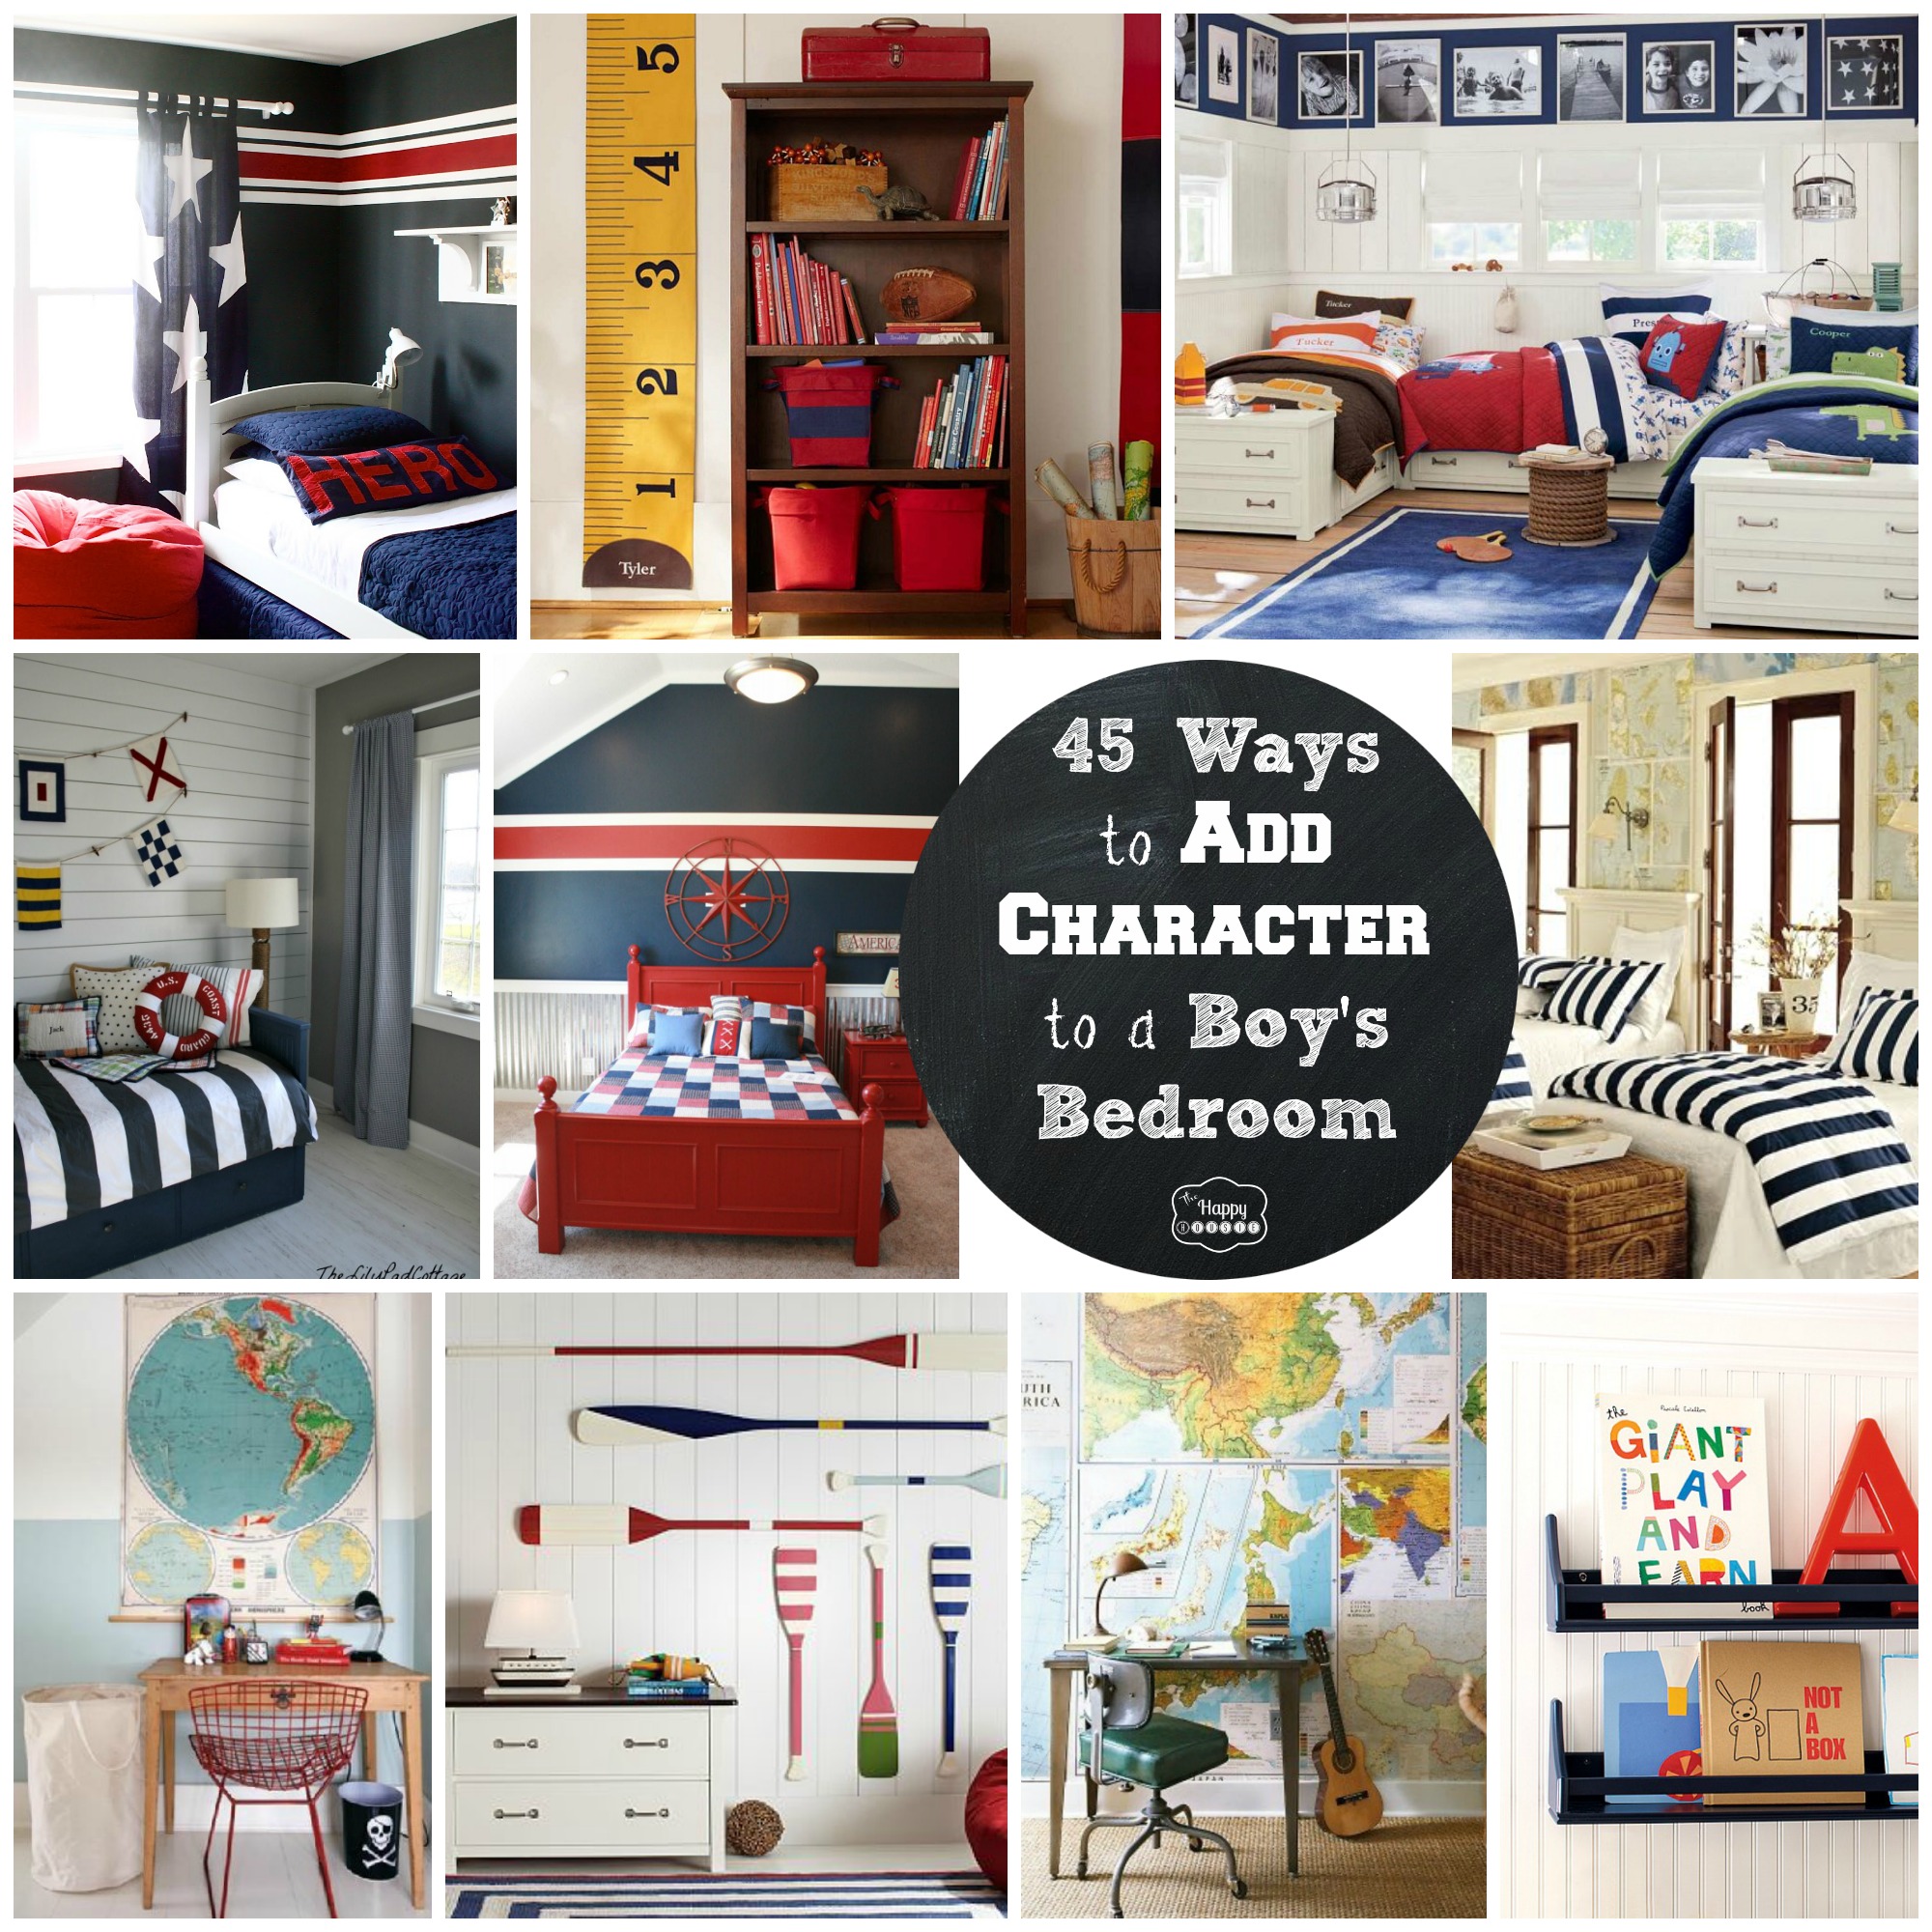 45 Ways to Add Character and Personality to a Boy’s Bedroom